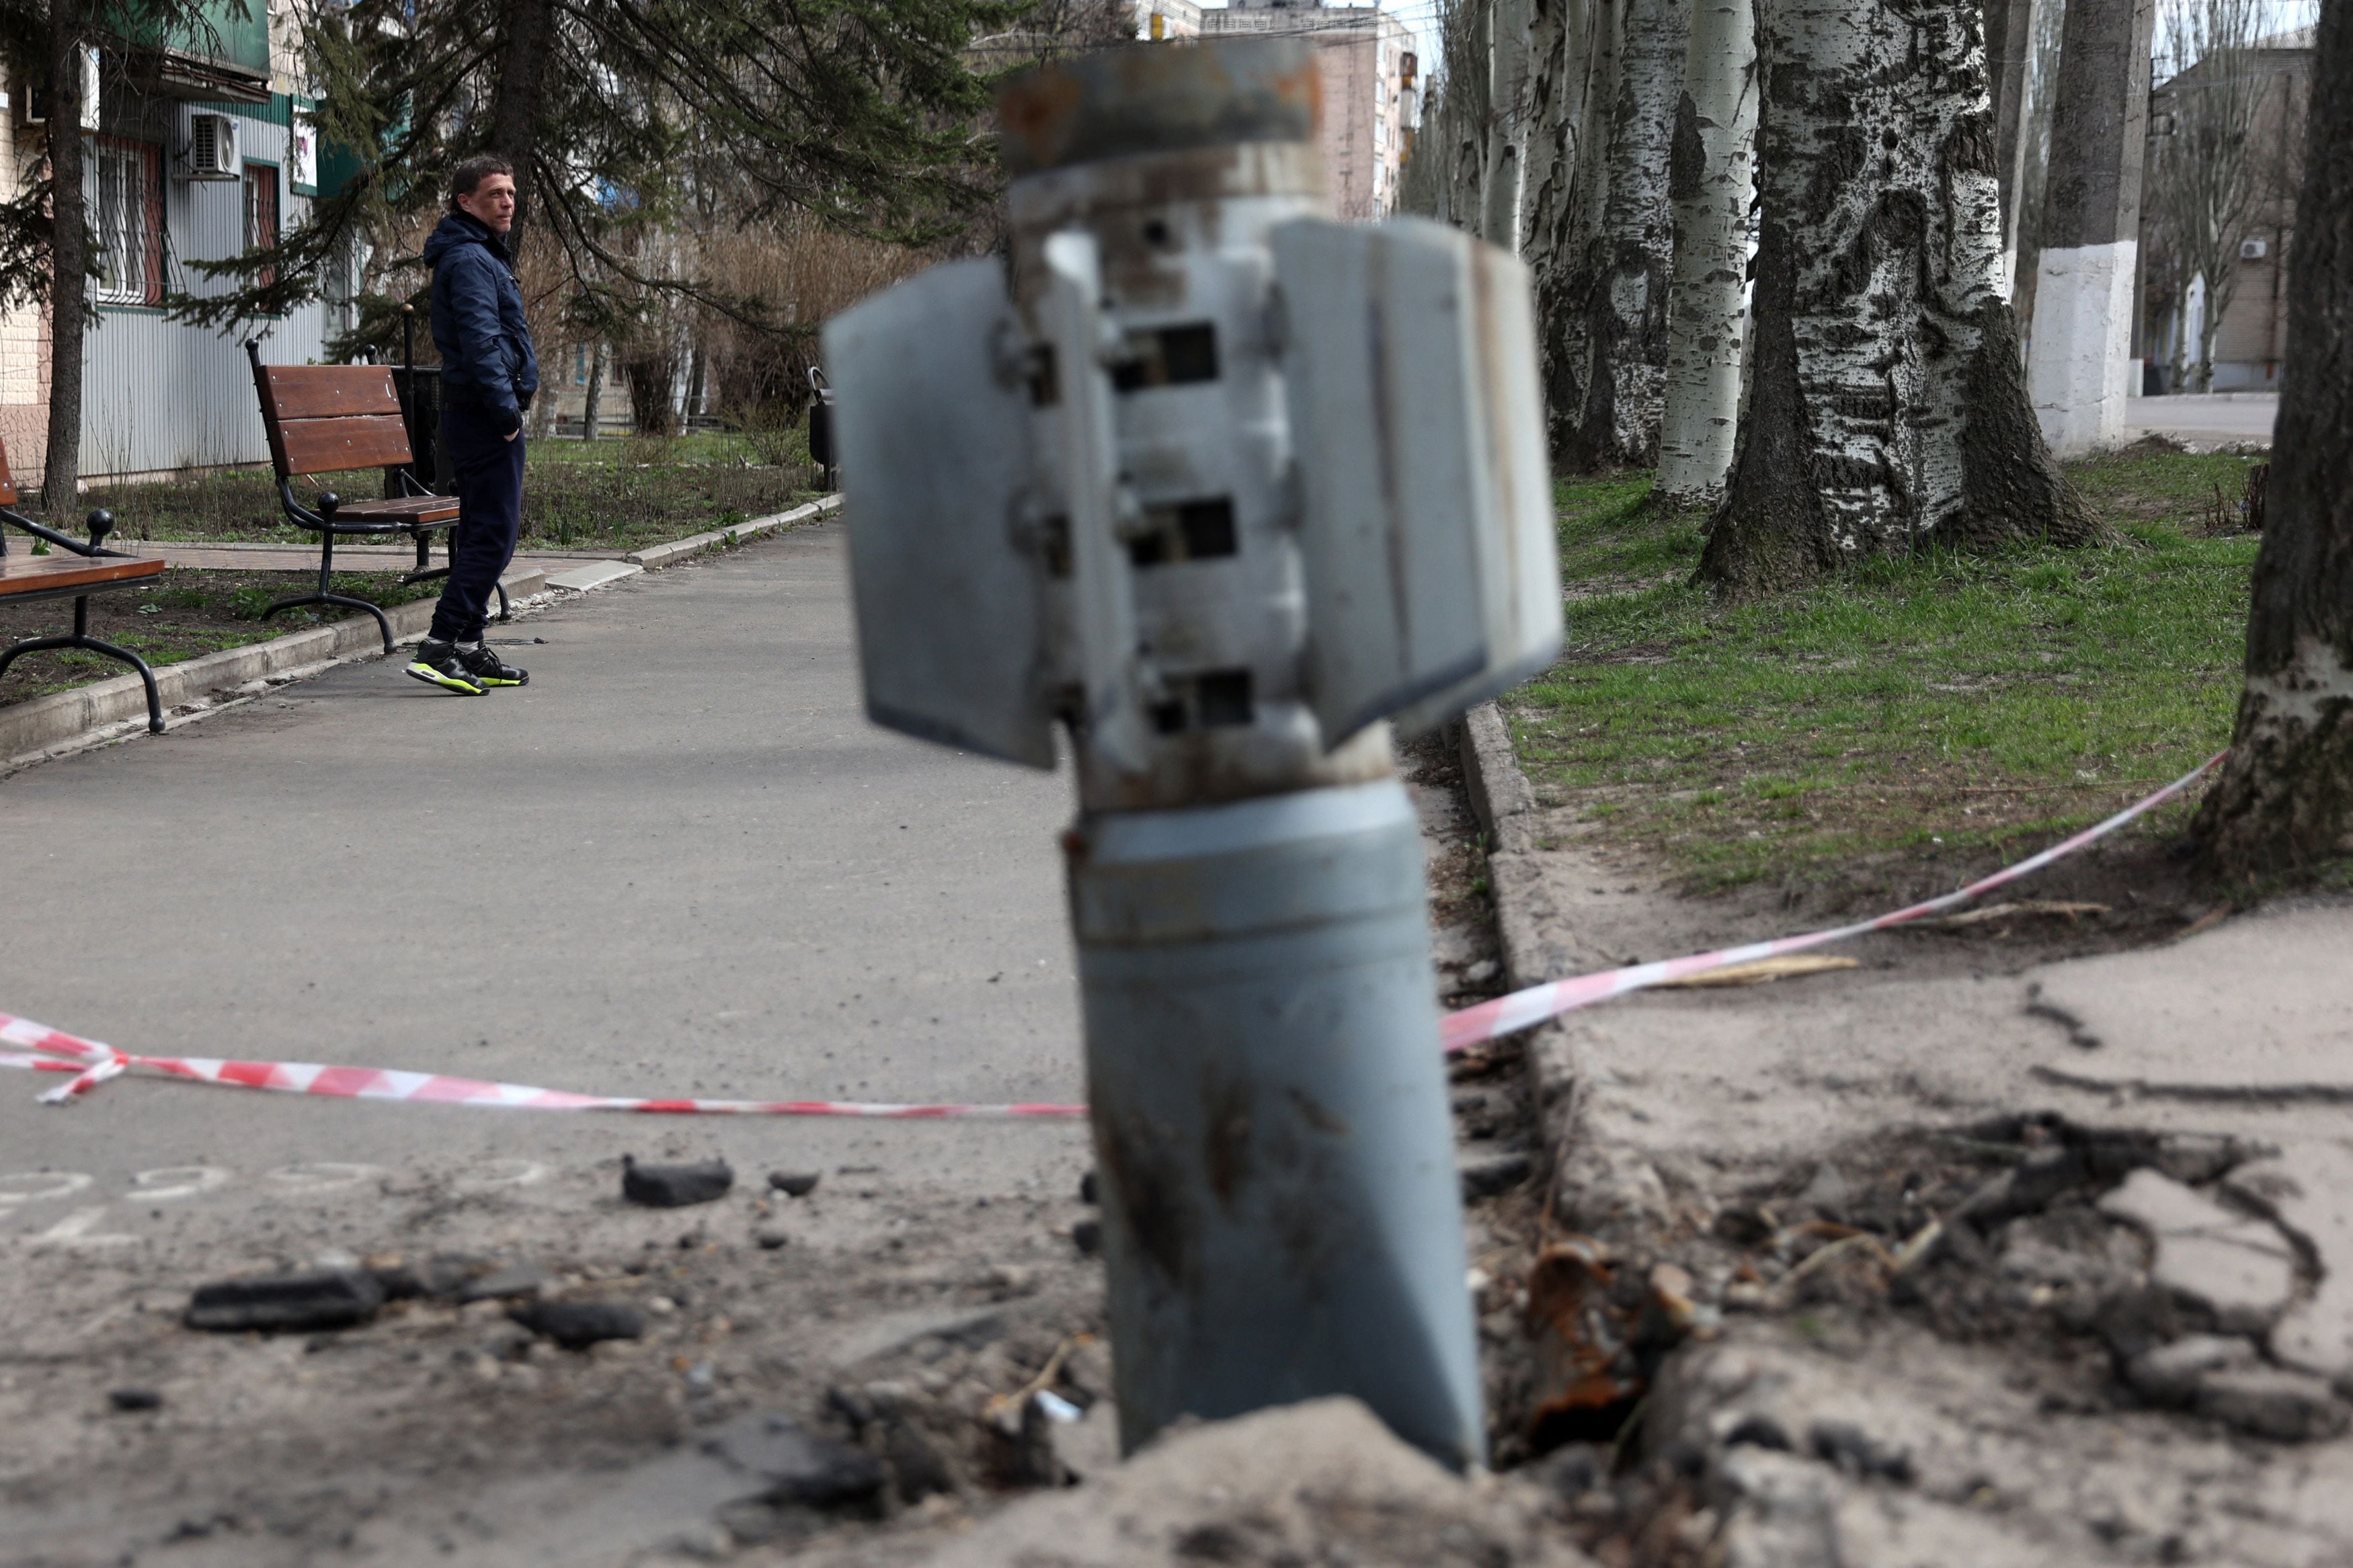 A man walks past an unexploded tail section of a 300mm rocket which appear to contained cluster bombs launched from a BM-30 Smerch multiple rocket launcher embedded in the ground after shelling in Lysychansk, Lugansk region on April 11, 2022. (Photo by ANATOLII STEPANOV/AFP via Getty Images)